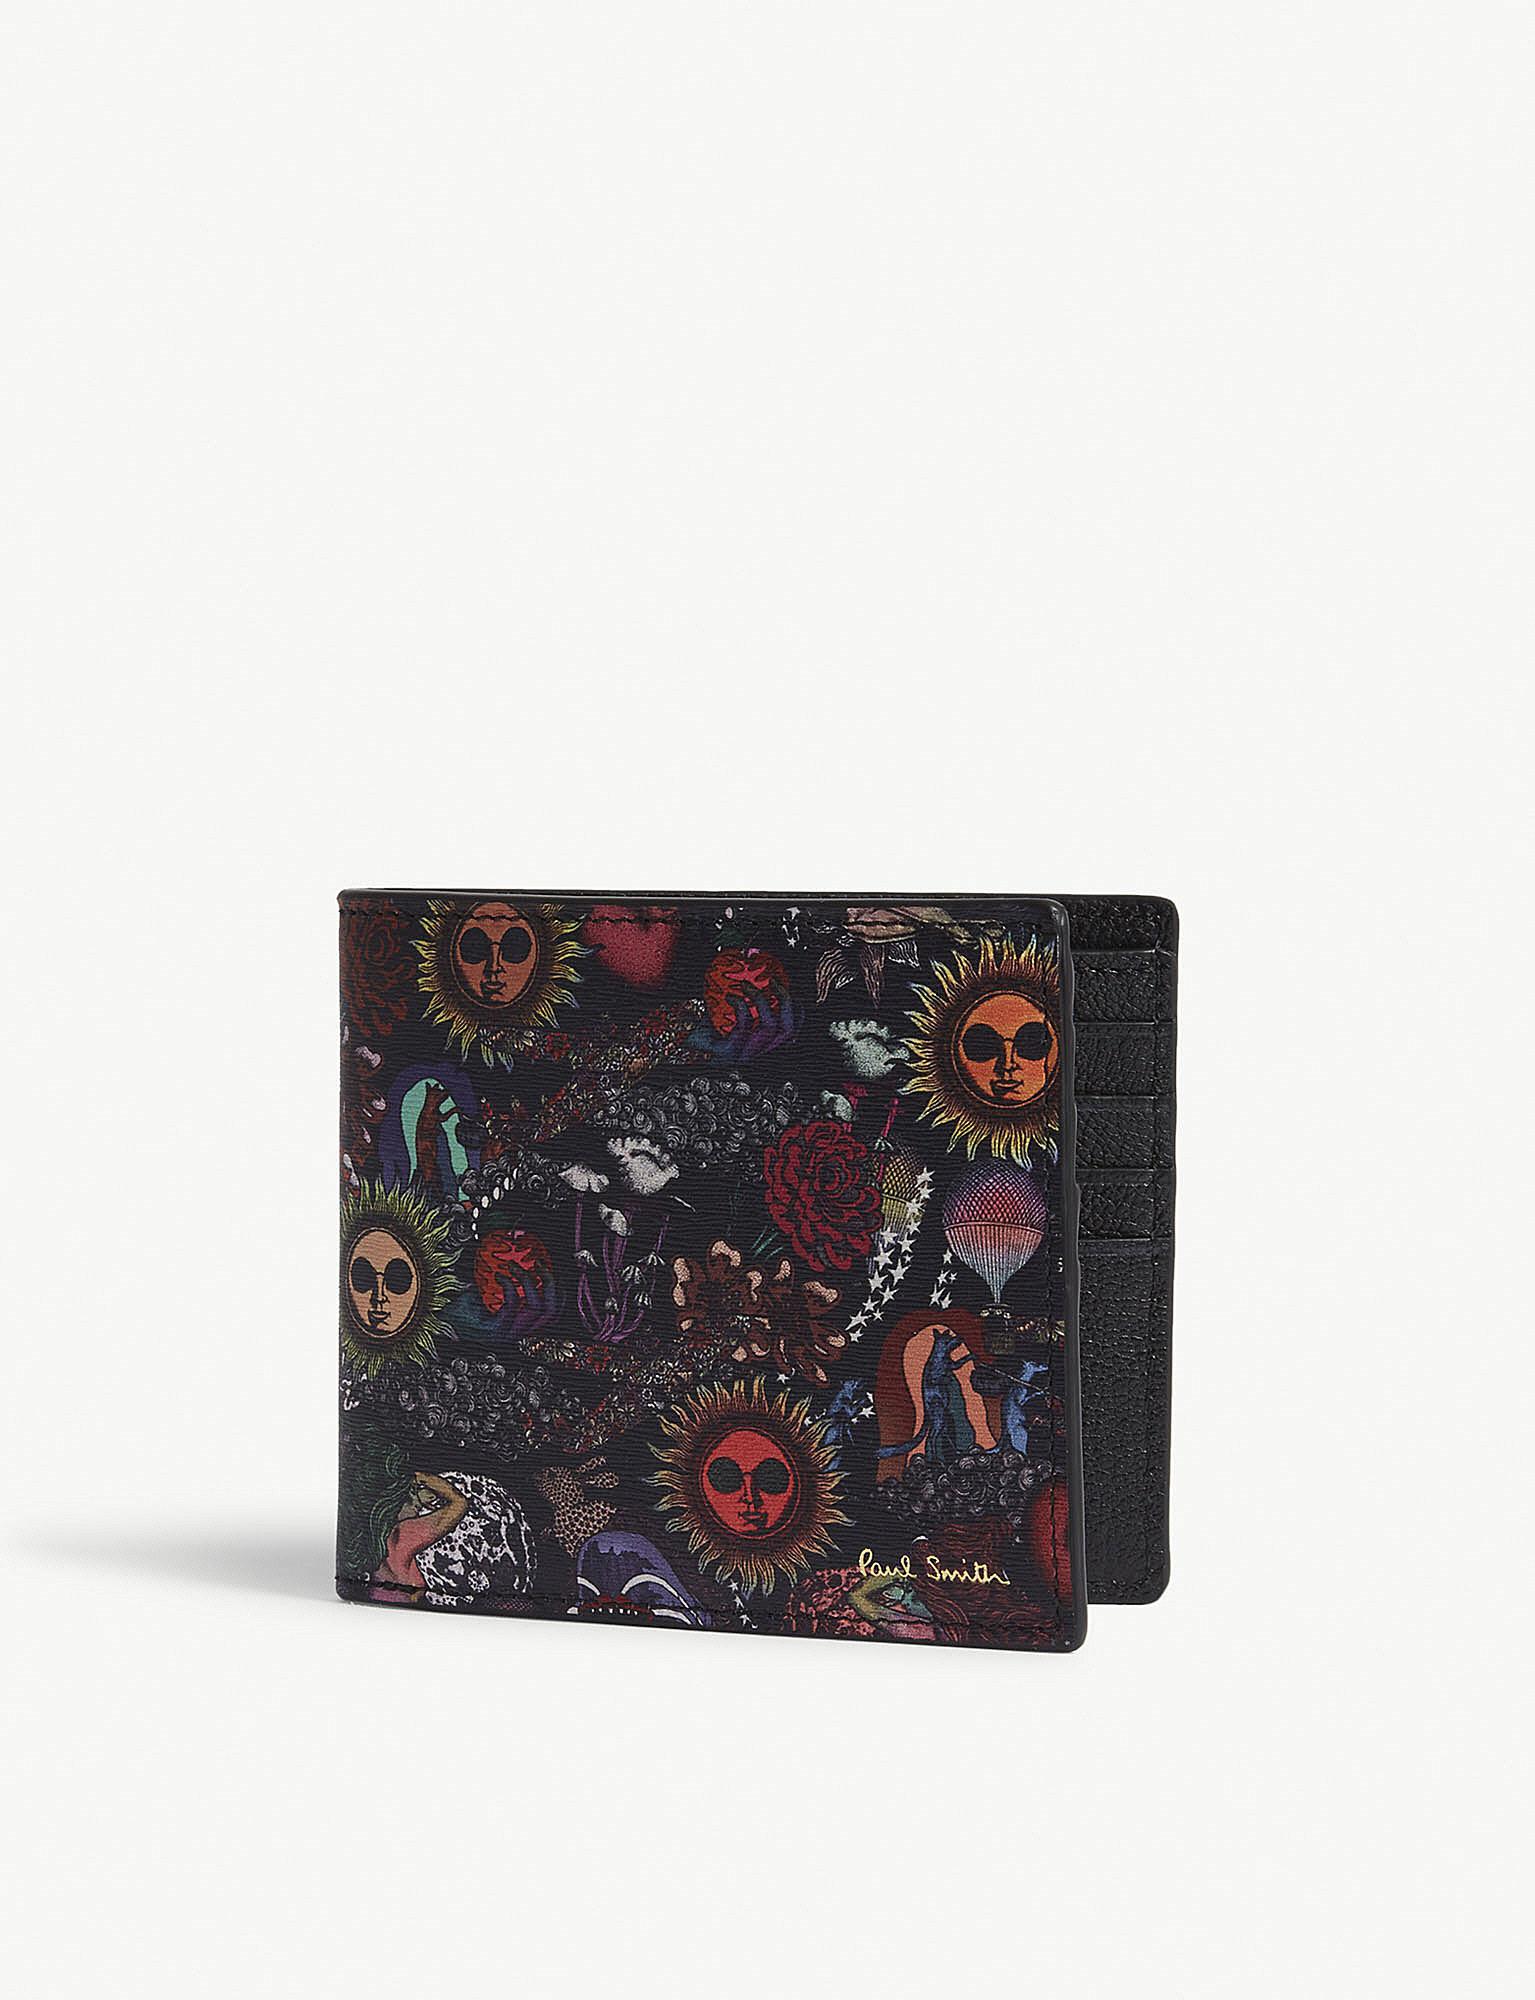 Paul Smith Psychedelic Sun Leather Billfold Wallet for Men | Lyst